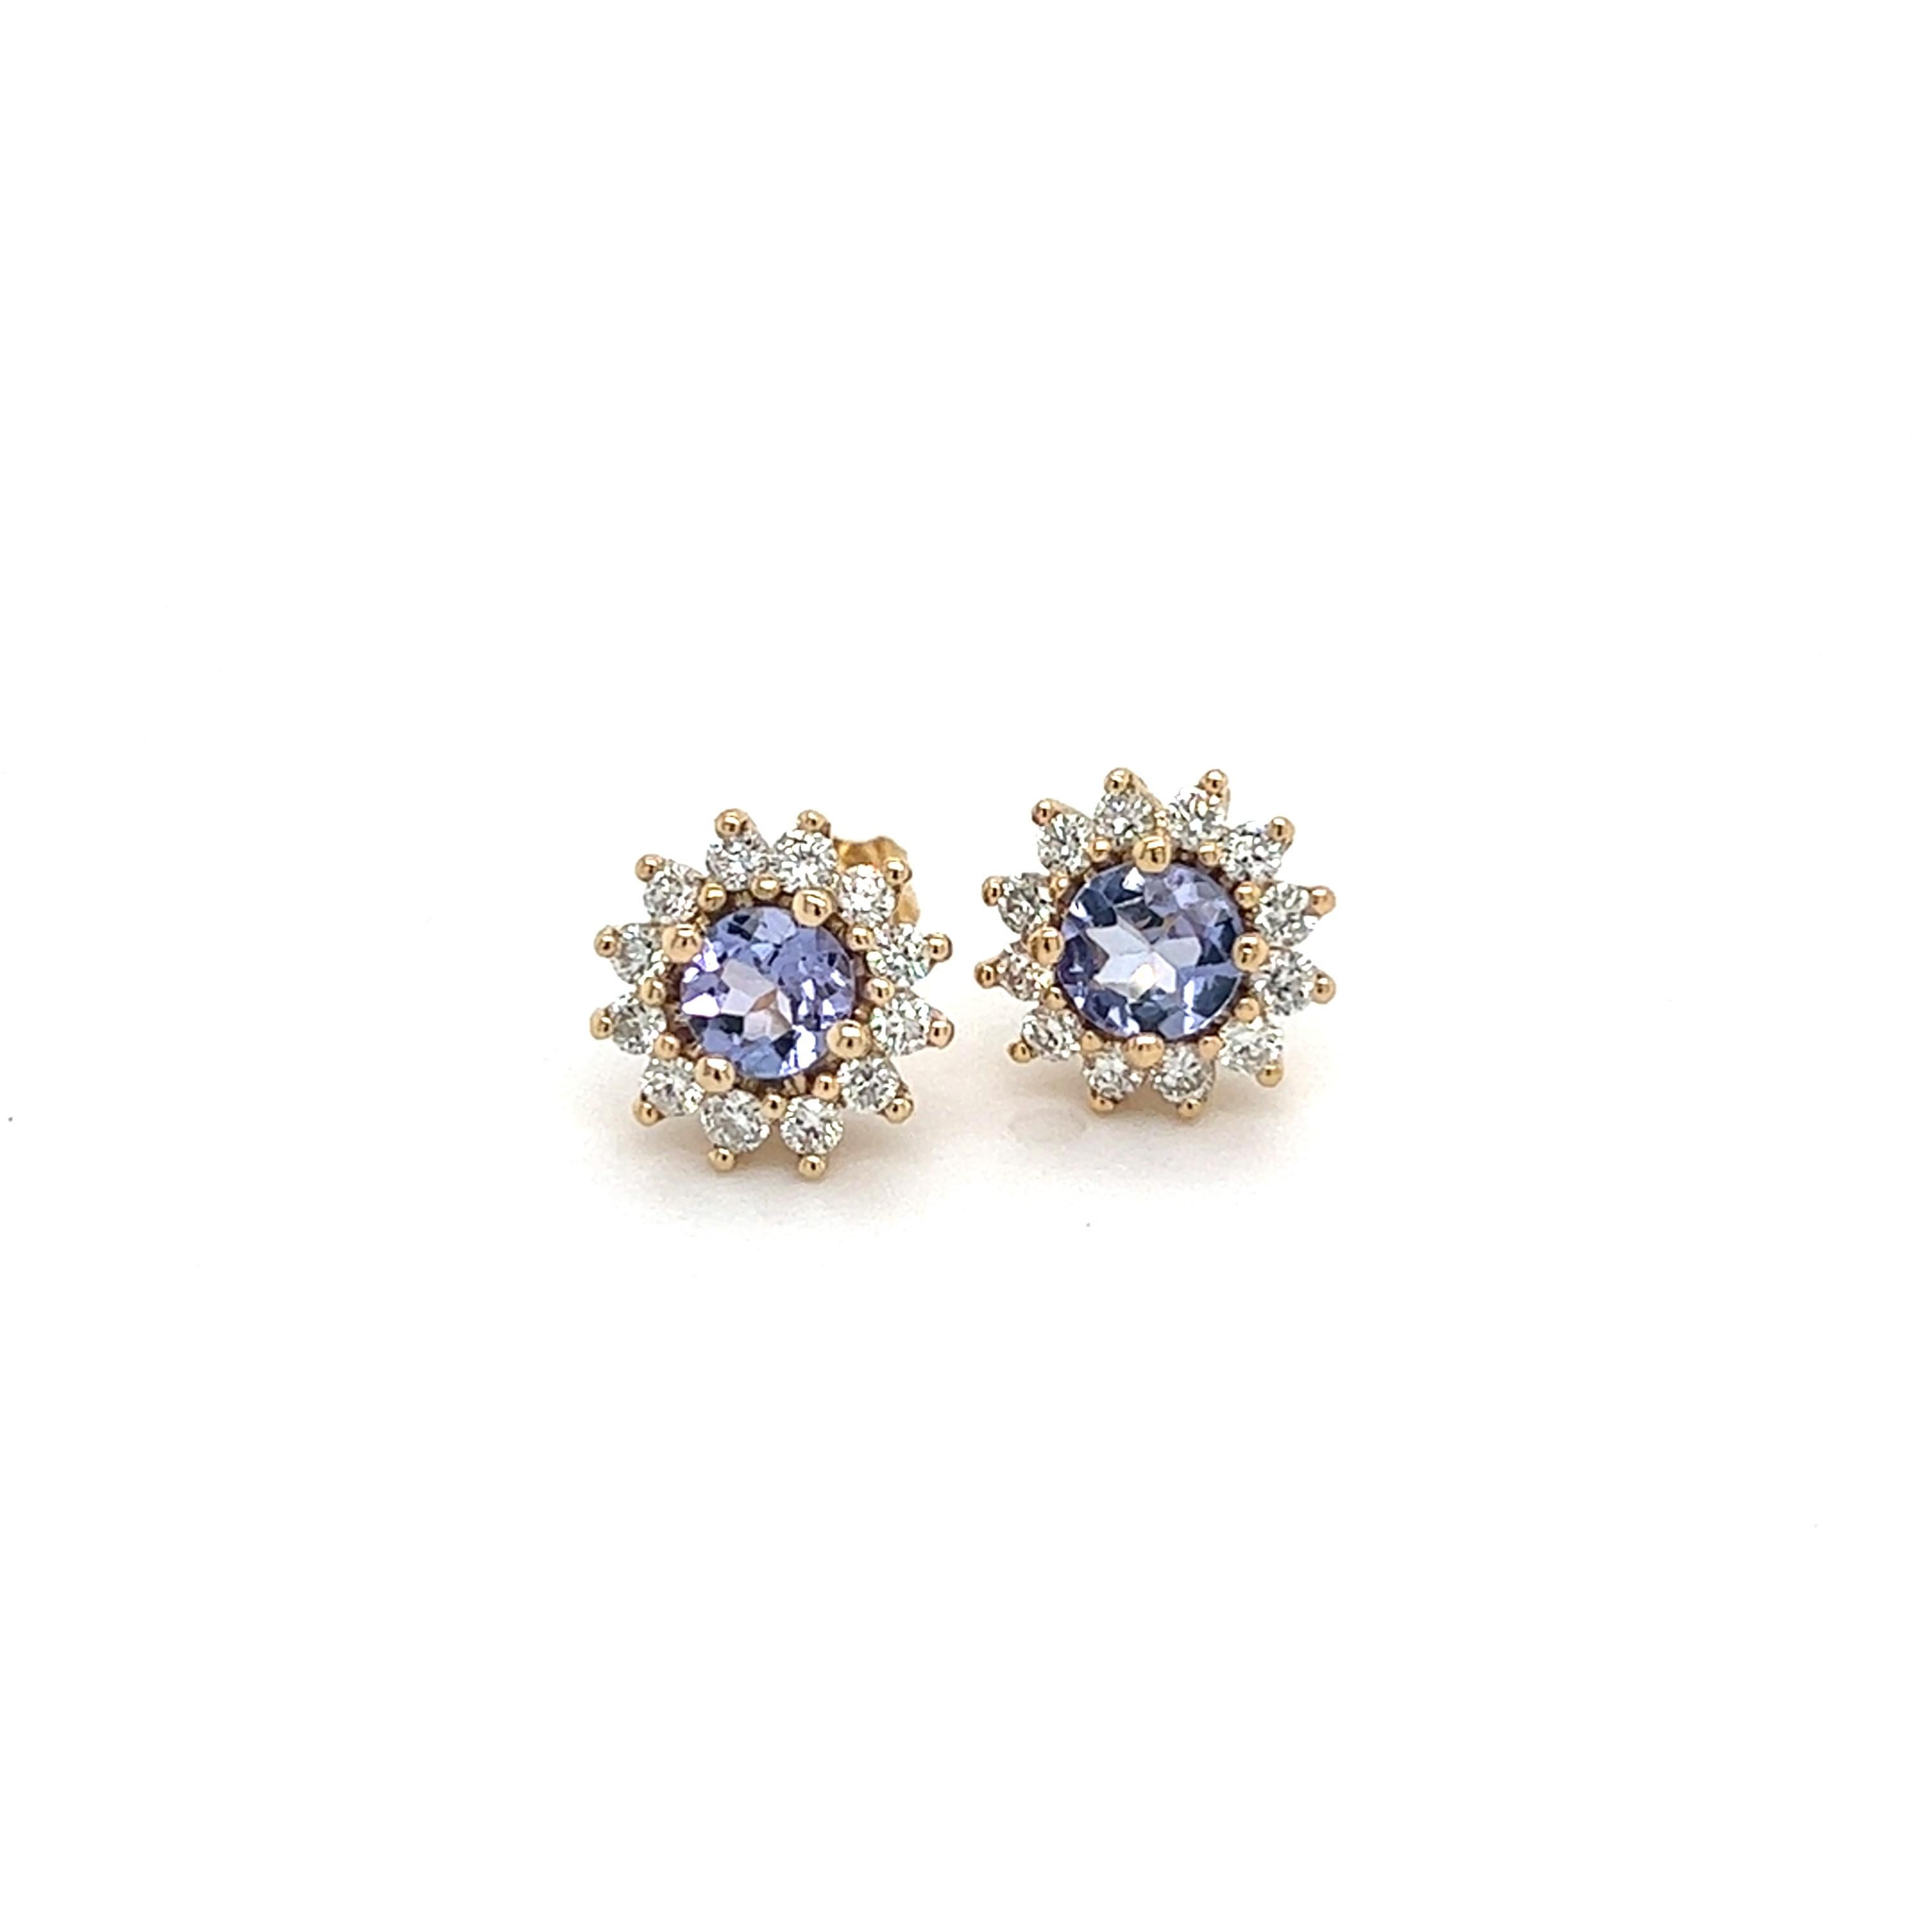 Round Cut Natural Tanzanite Diamond Stud Earrings 14k Y Gold 1.18 TCW Certified For Sale